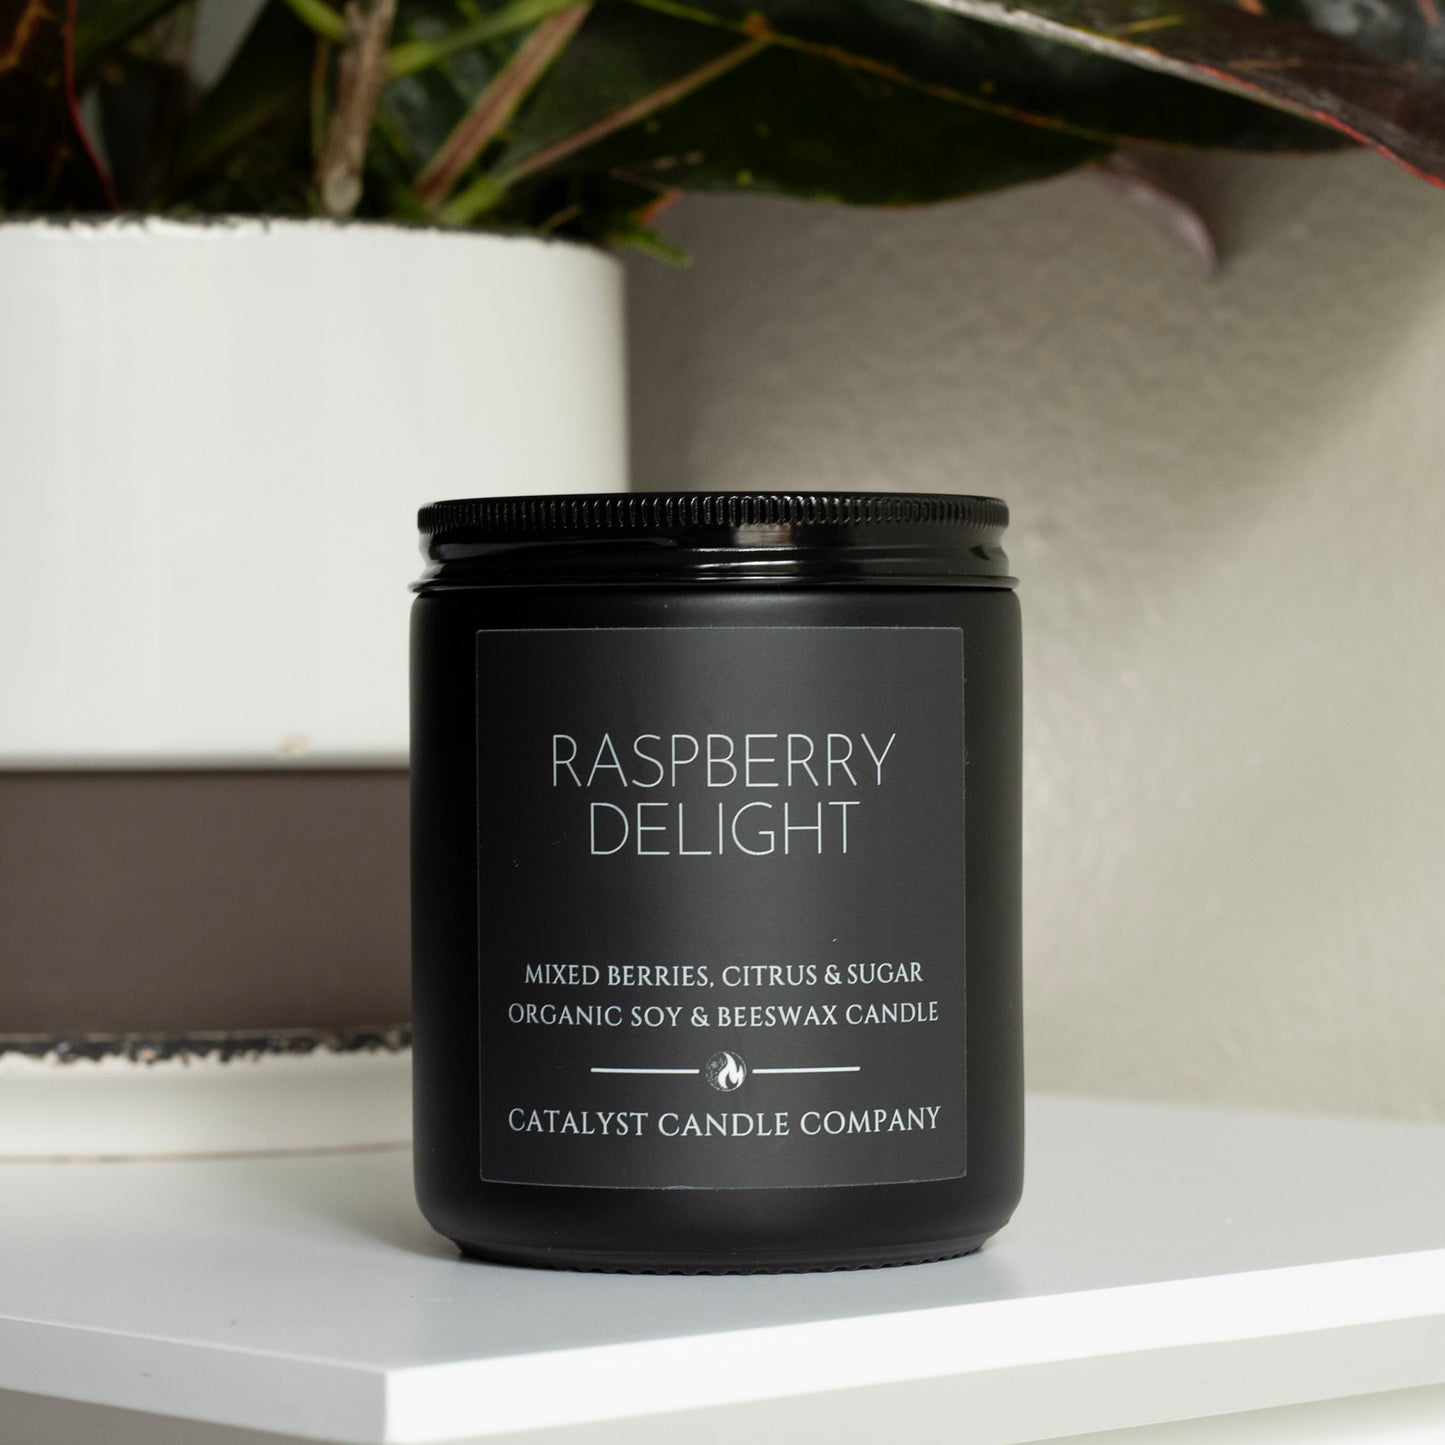 RASPBERRY DELIGHT | Mixed Berries, Citrus & Sugar Scented | Organic Soy & Beeswax Candle